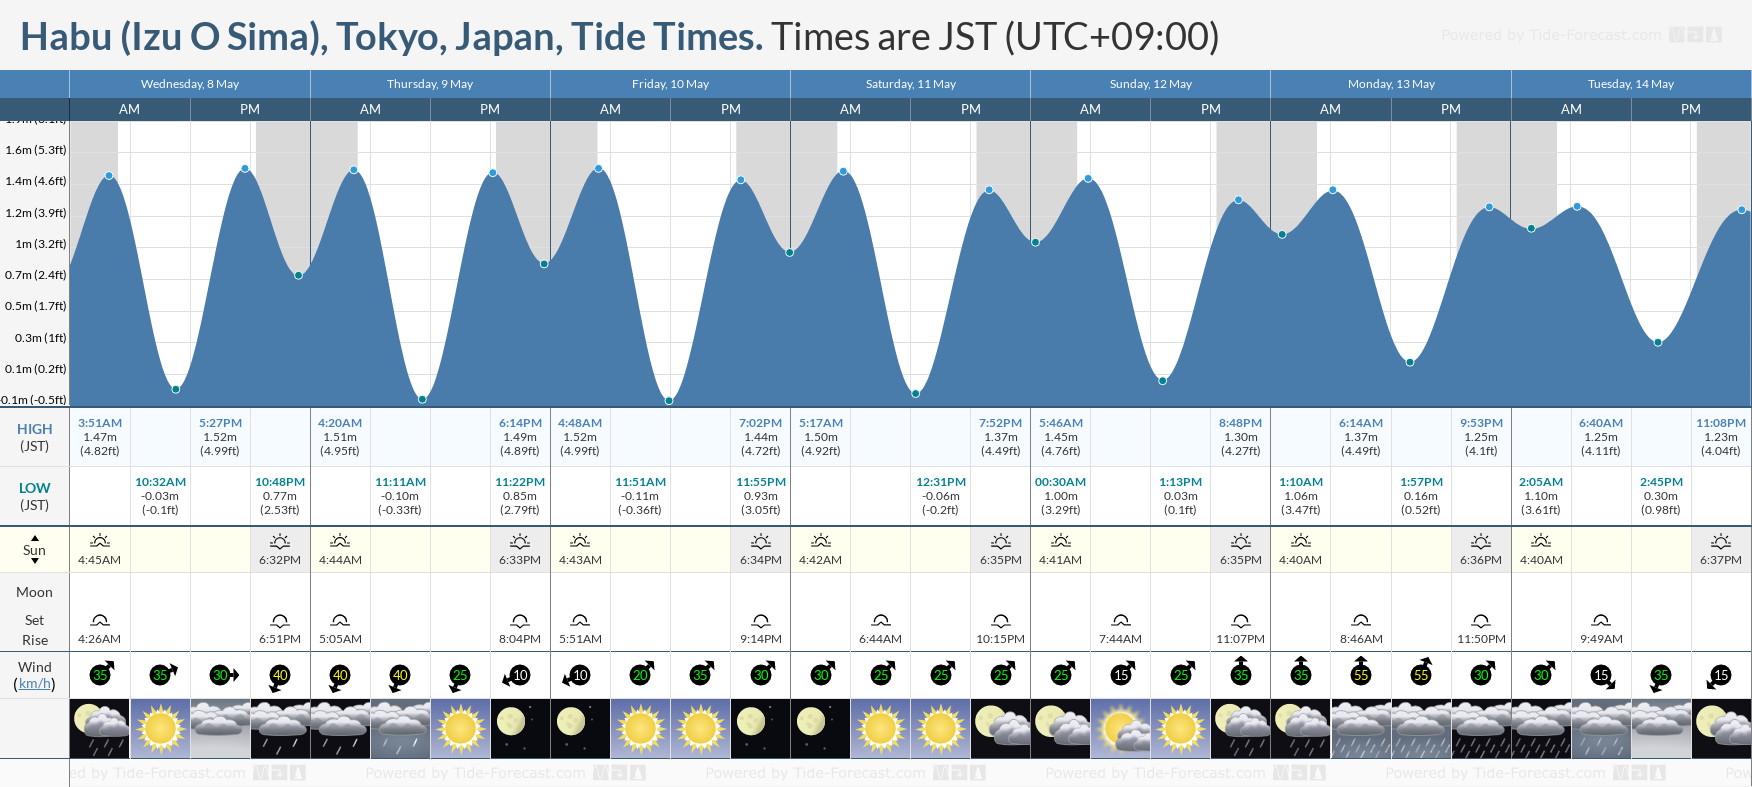 Habu (Izu O Sima), Tokyo, Japan Tide Chart including high and low tide times for the next 7 days